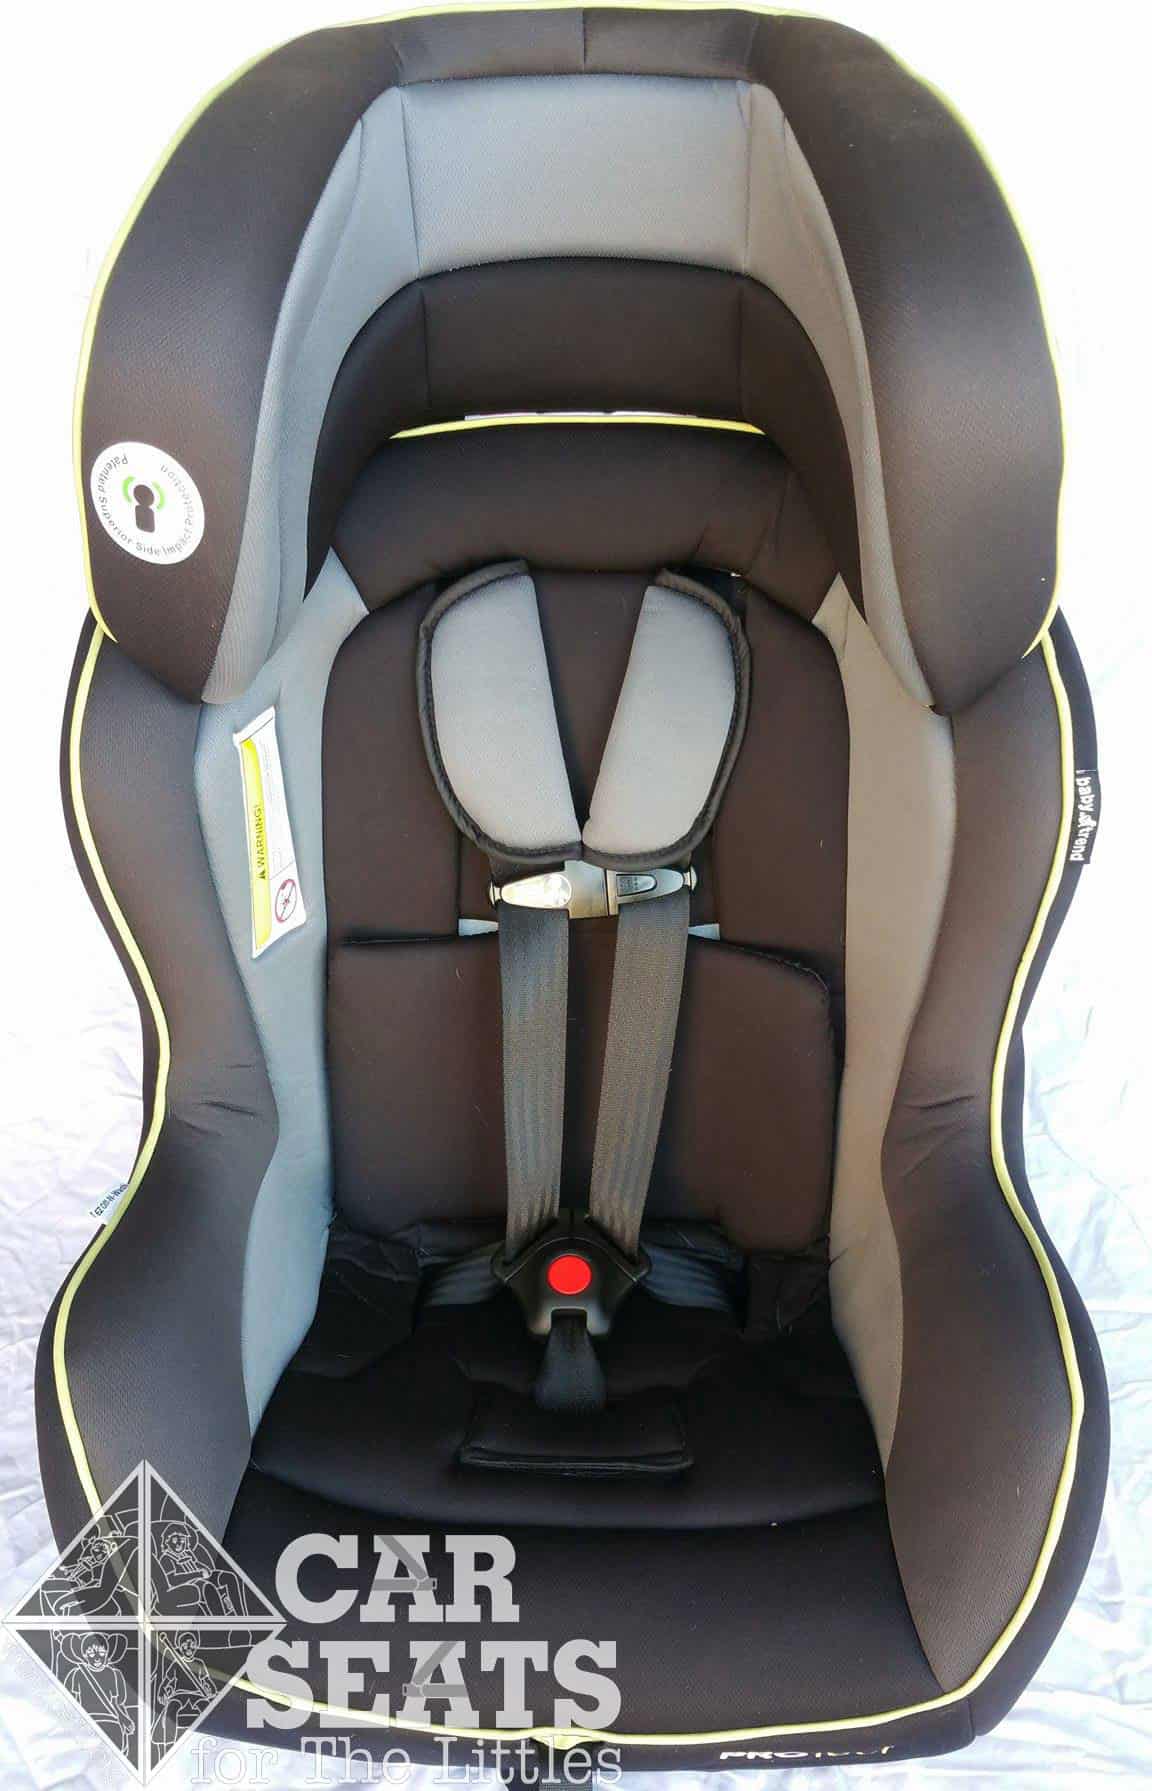 Baby Trend Protect Sport Convertible Car Seat Review Seats For The Littles - Are Baby Trend Car Seats Safe